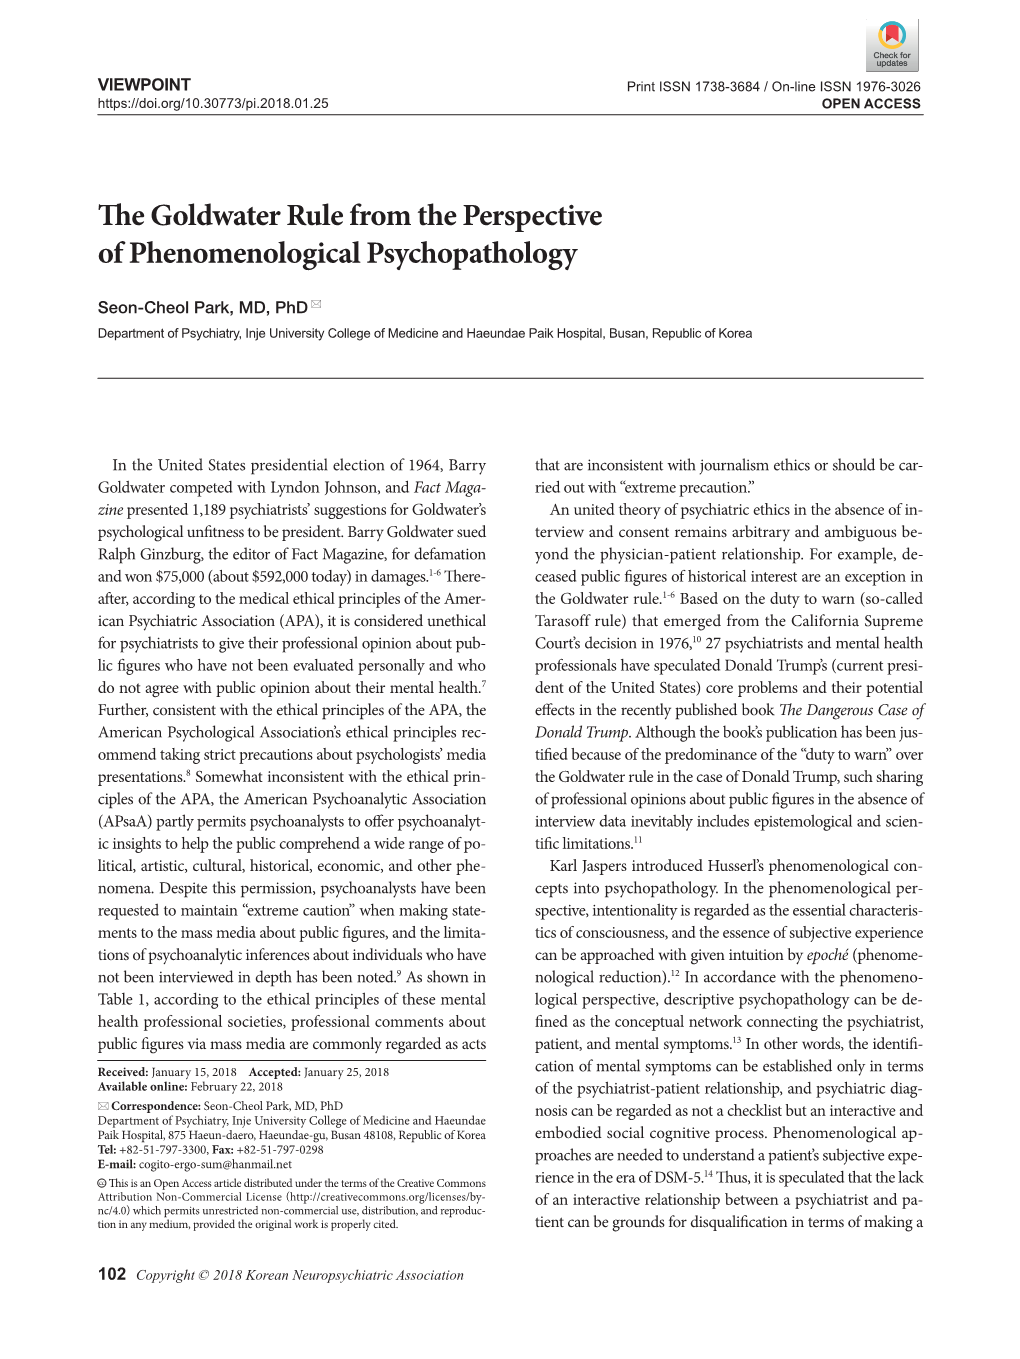 The Goldwater Rule from the Perspective of Phenomenological Psychopathology